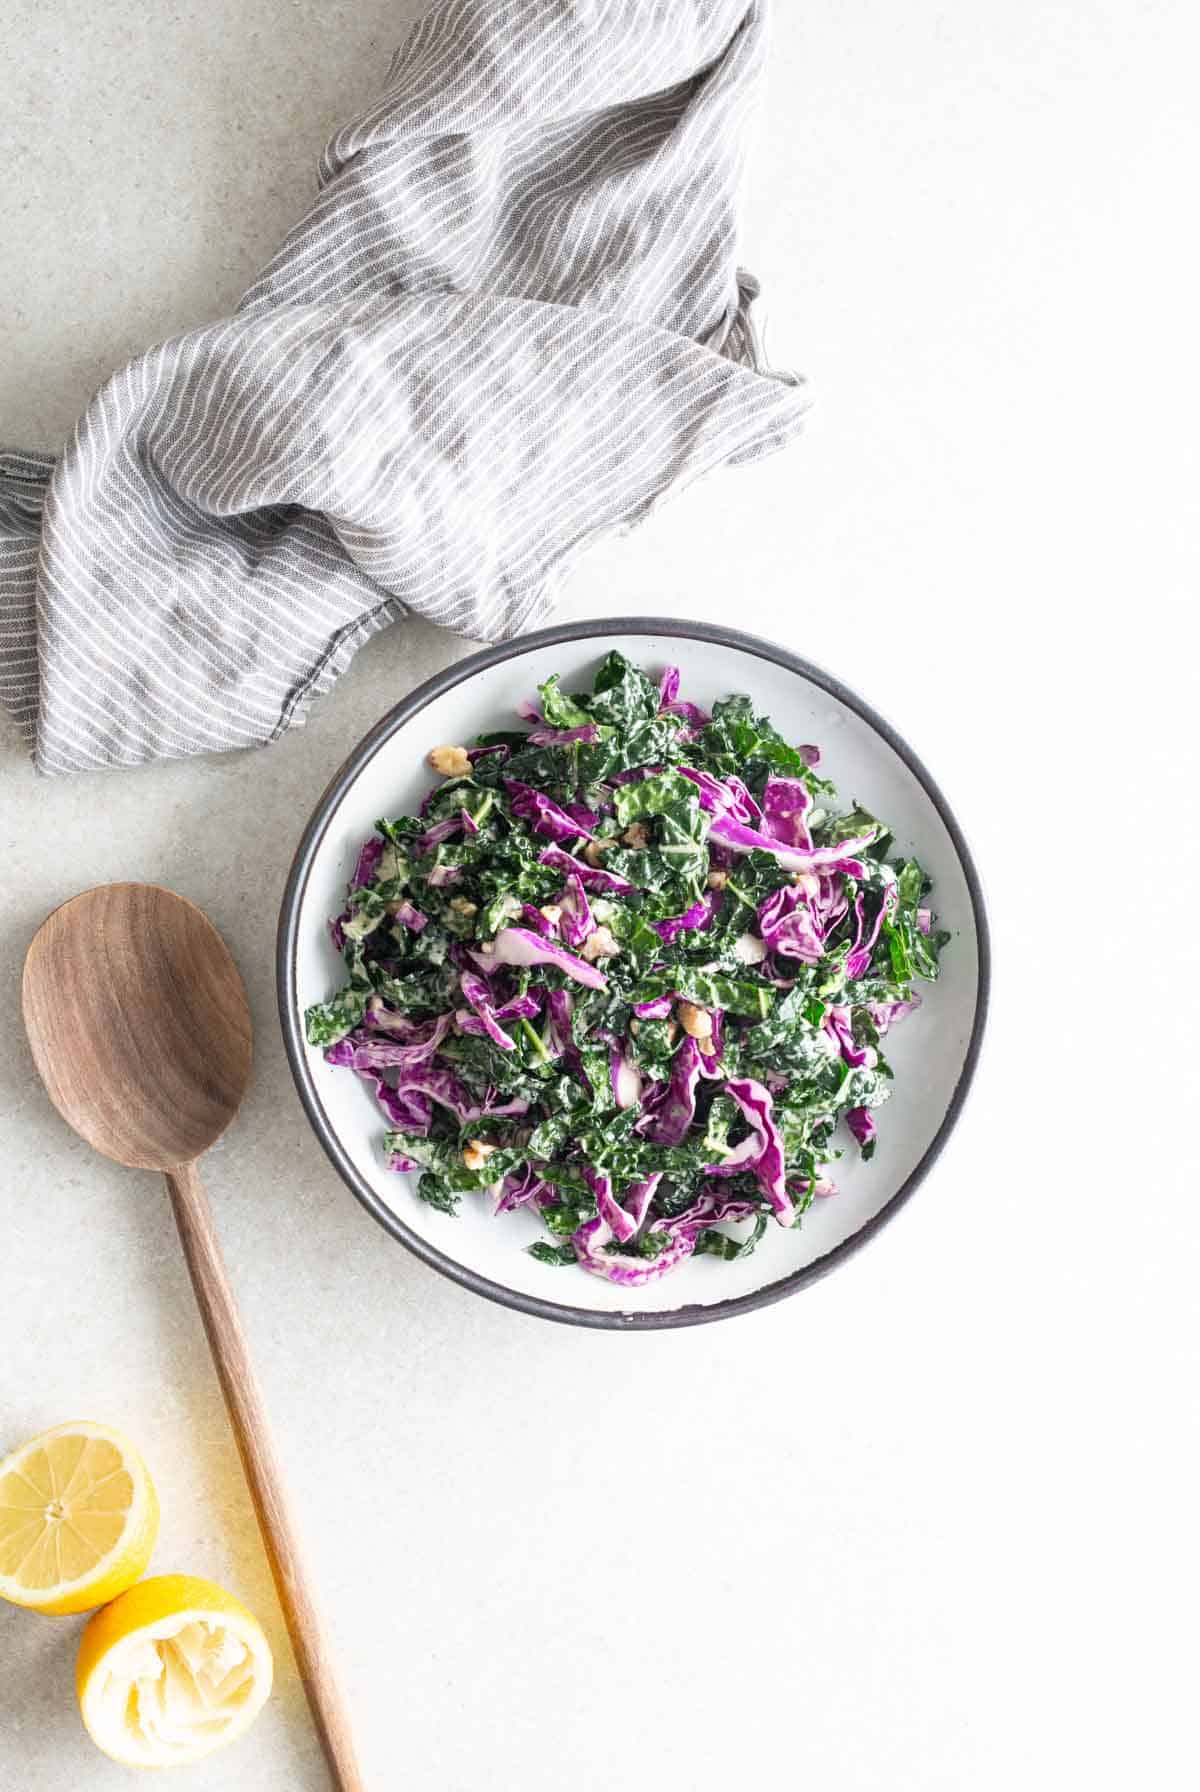 A bowl of kale salad with lemon slices and a wooden spoon.